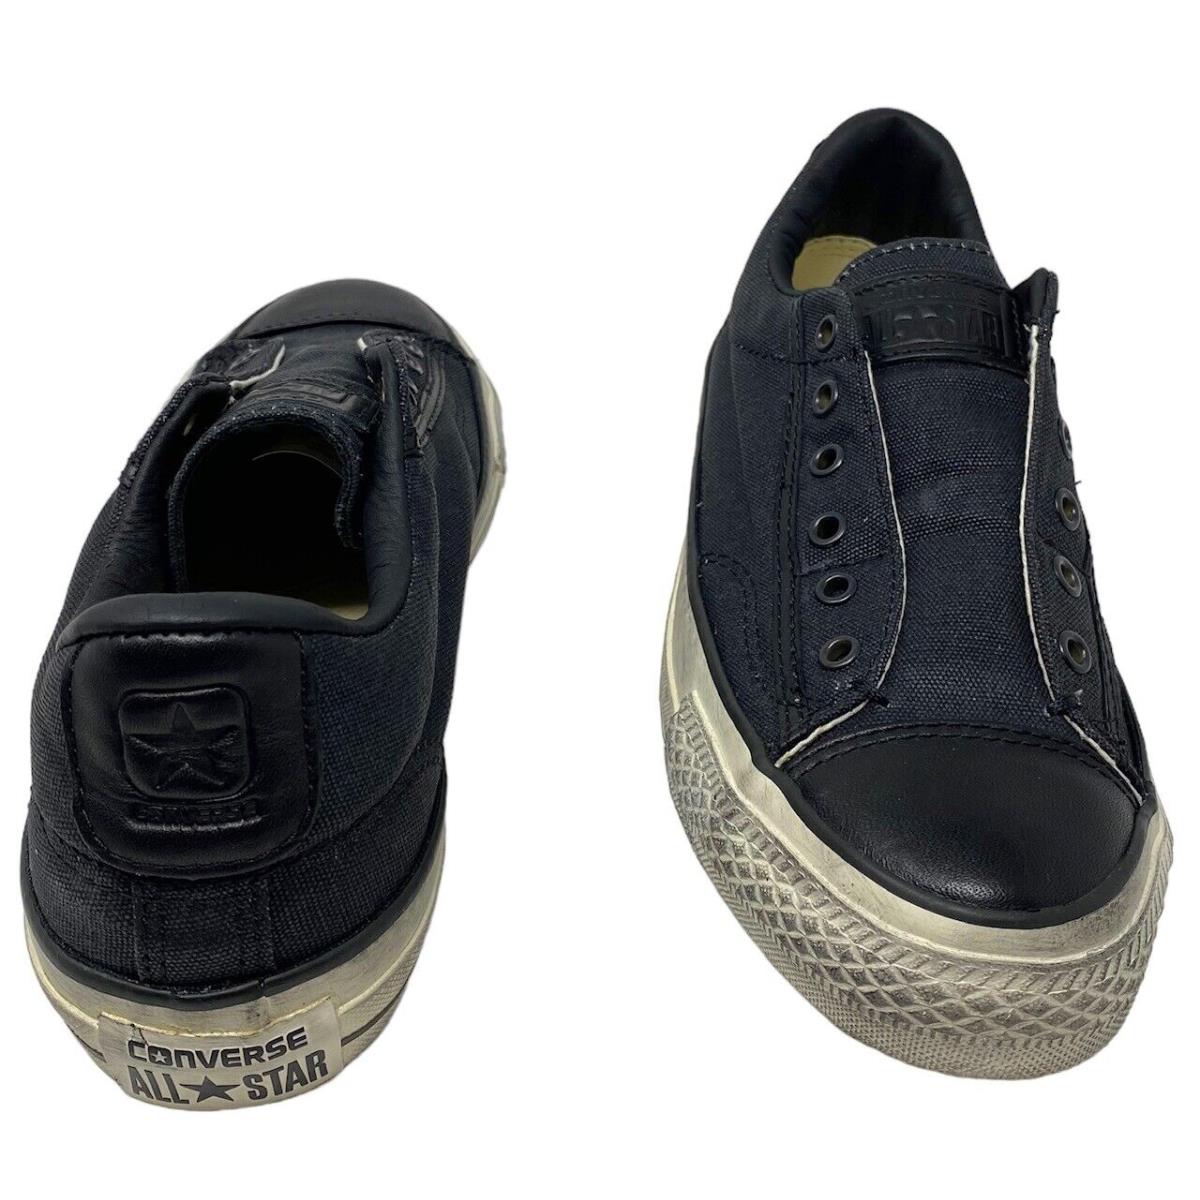 Converse Taylor X Varvatos Laceless Slip-on Shoes in Burnished Black | 032488881581 - Converse shoes - Black | SporTipTop